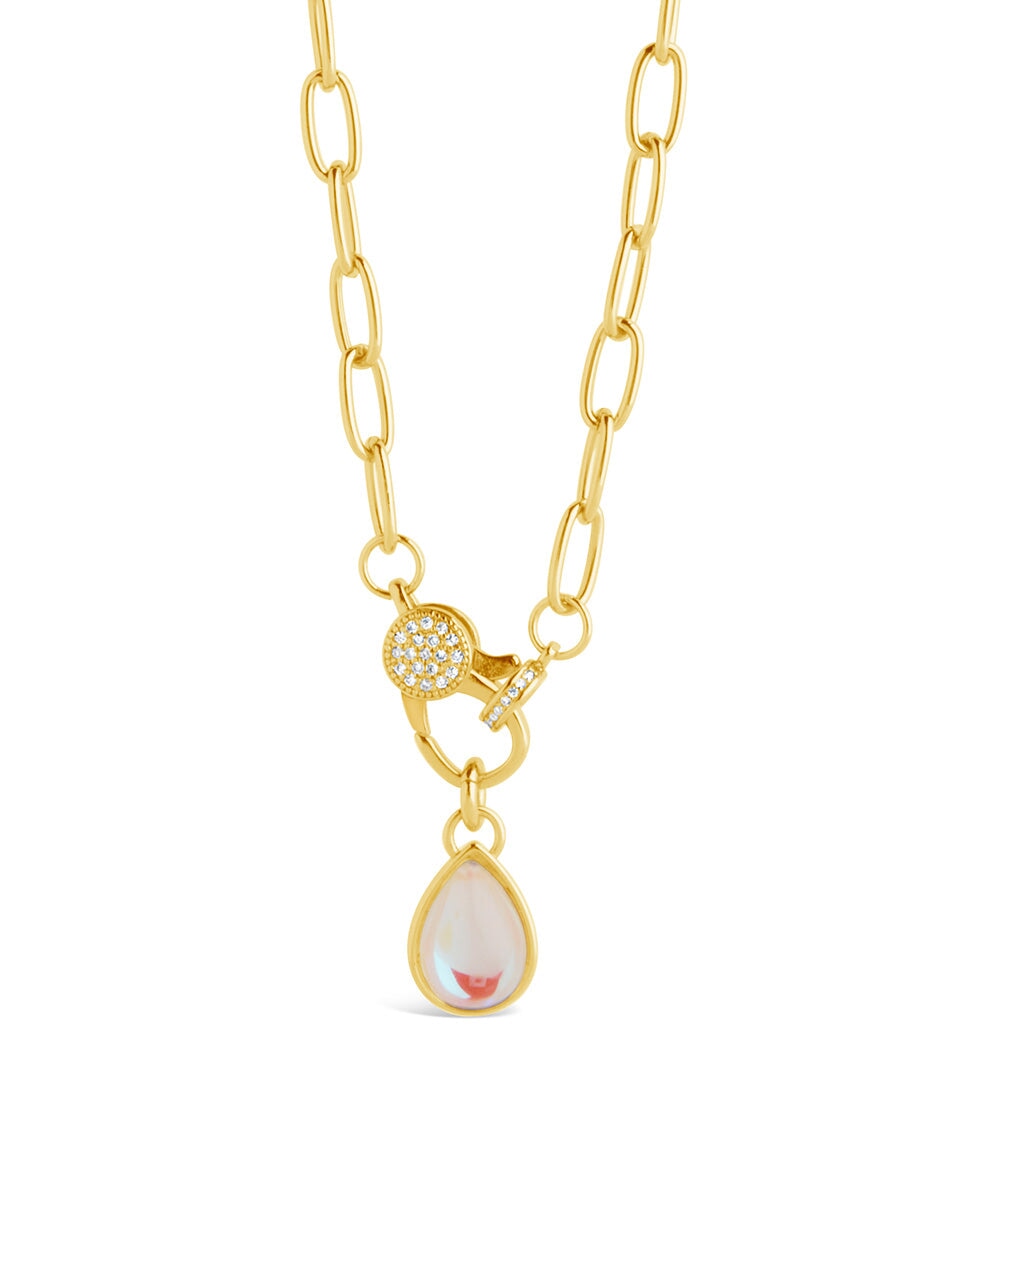 Tay Moonstone Charm & Chain Necklace Necklace Sterling Forever Gold 